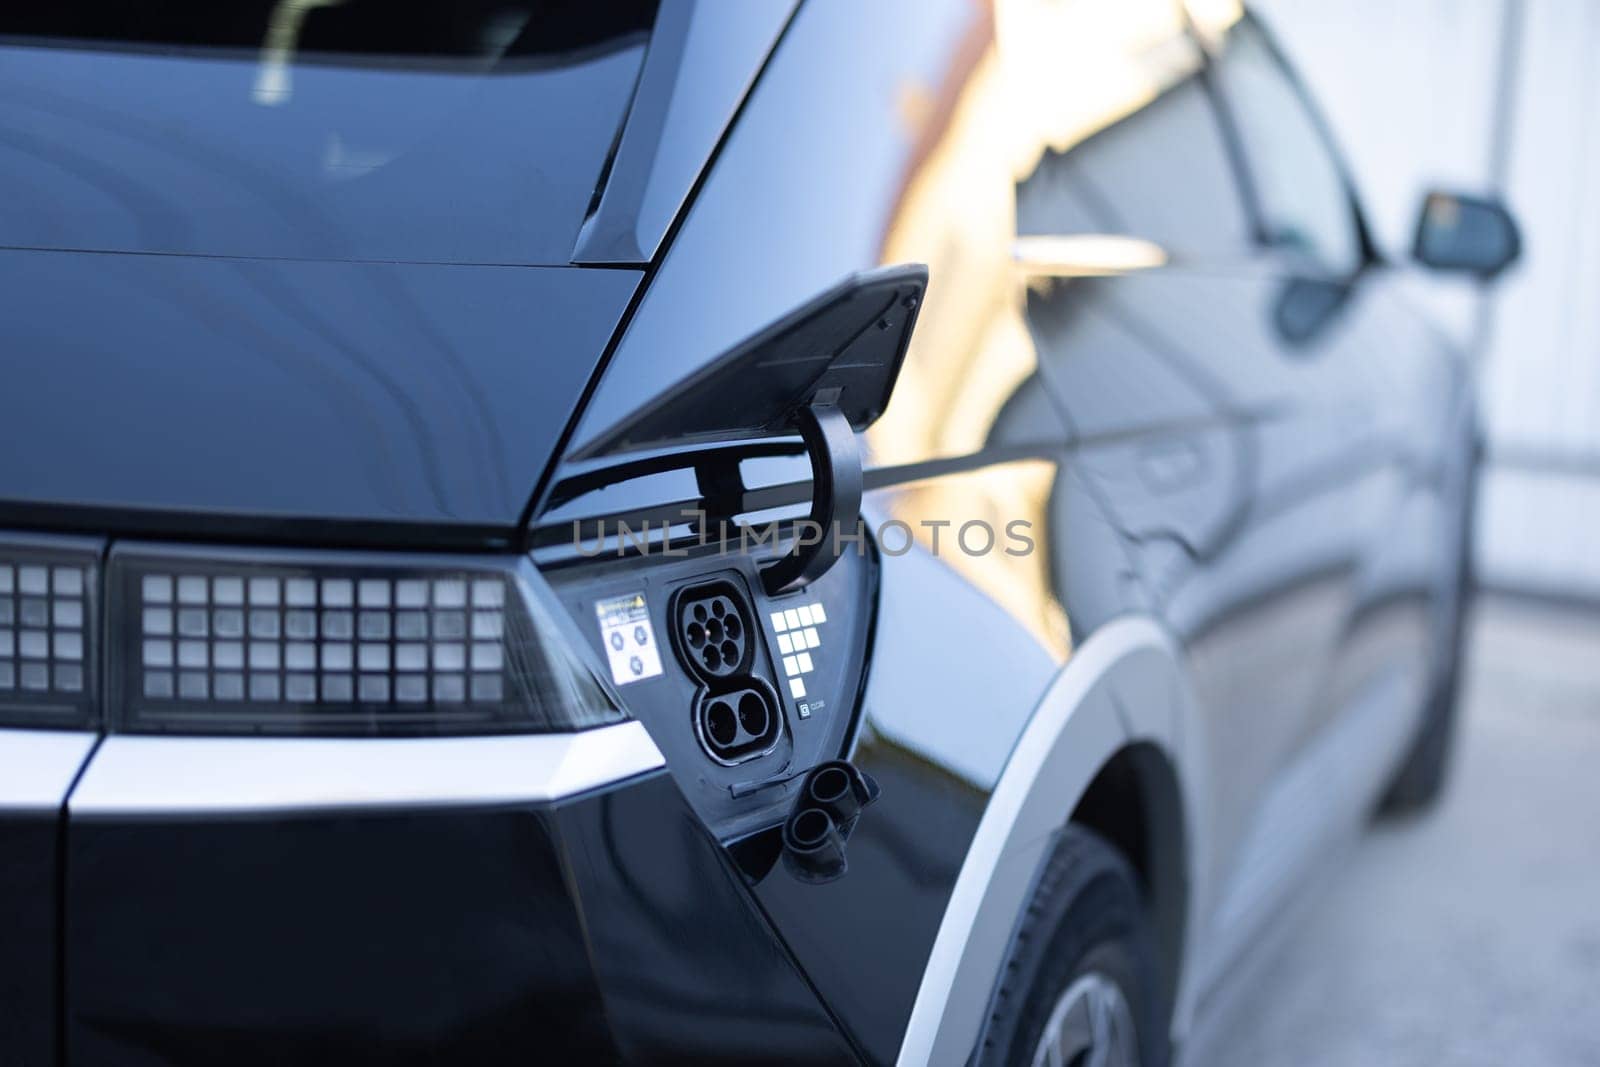 Close-up of CCS Type 2 electric charge plug and socket on black van. Charging port on a modern electric car. Fast charging socket type 2 combo electric car. Type 2 CCS plug port on electric vehicle by uflypro